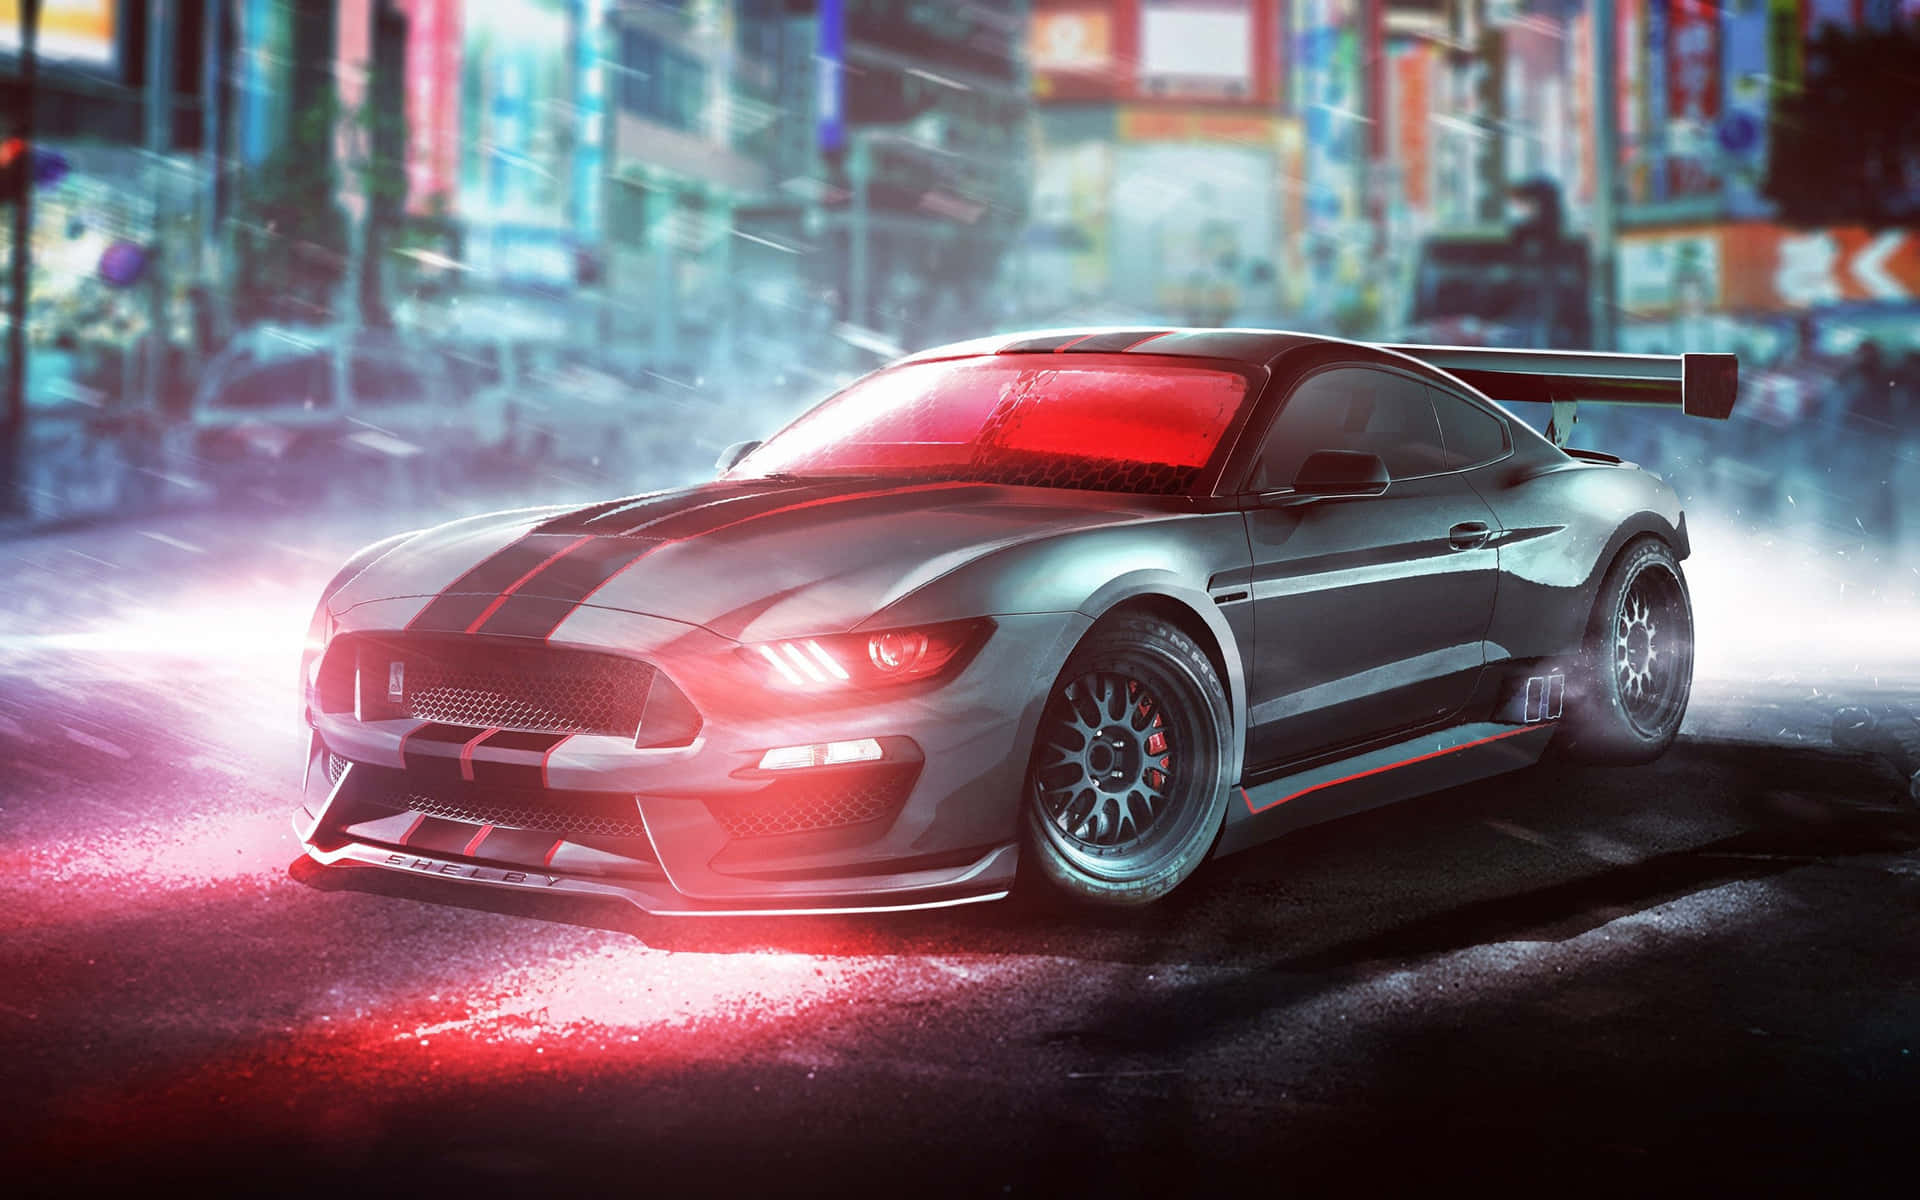 Mesmerizing Shot Of A Ford Mustang Gt350r In Full Glory Wallpaper